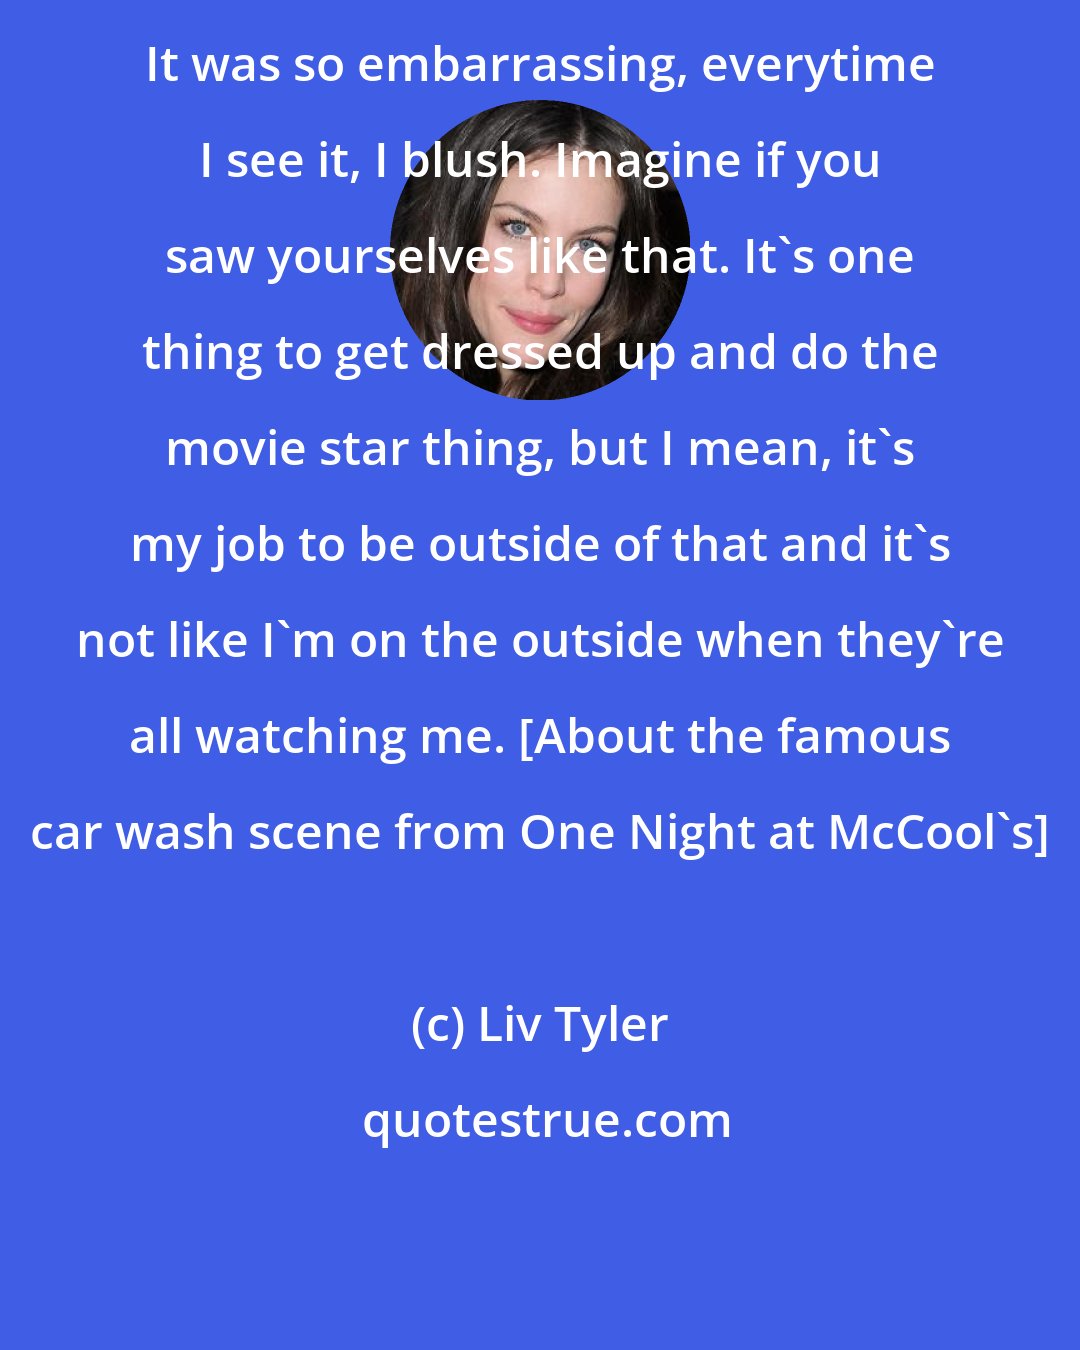 Liv Tyler: It was so embarrassing, everytime I see it, I blush. Imagine if you saw yourselves like that. It's one thing to get dressed up and do the movie star thing, but I mean, it's my job to be outside of that and it's not like I'm on the outside when they're all watching me. [About the famous car wash scene from One Night at McCool's]